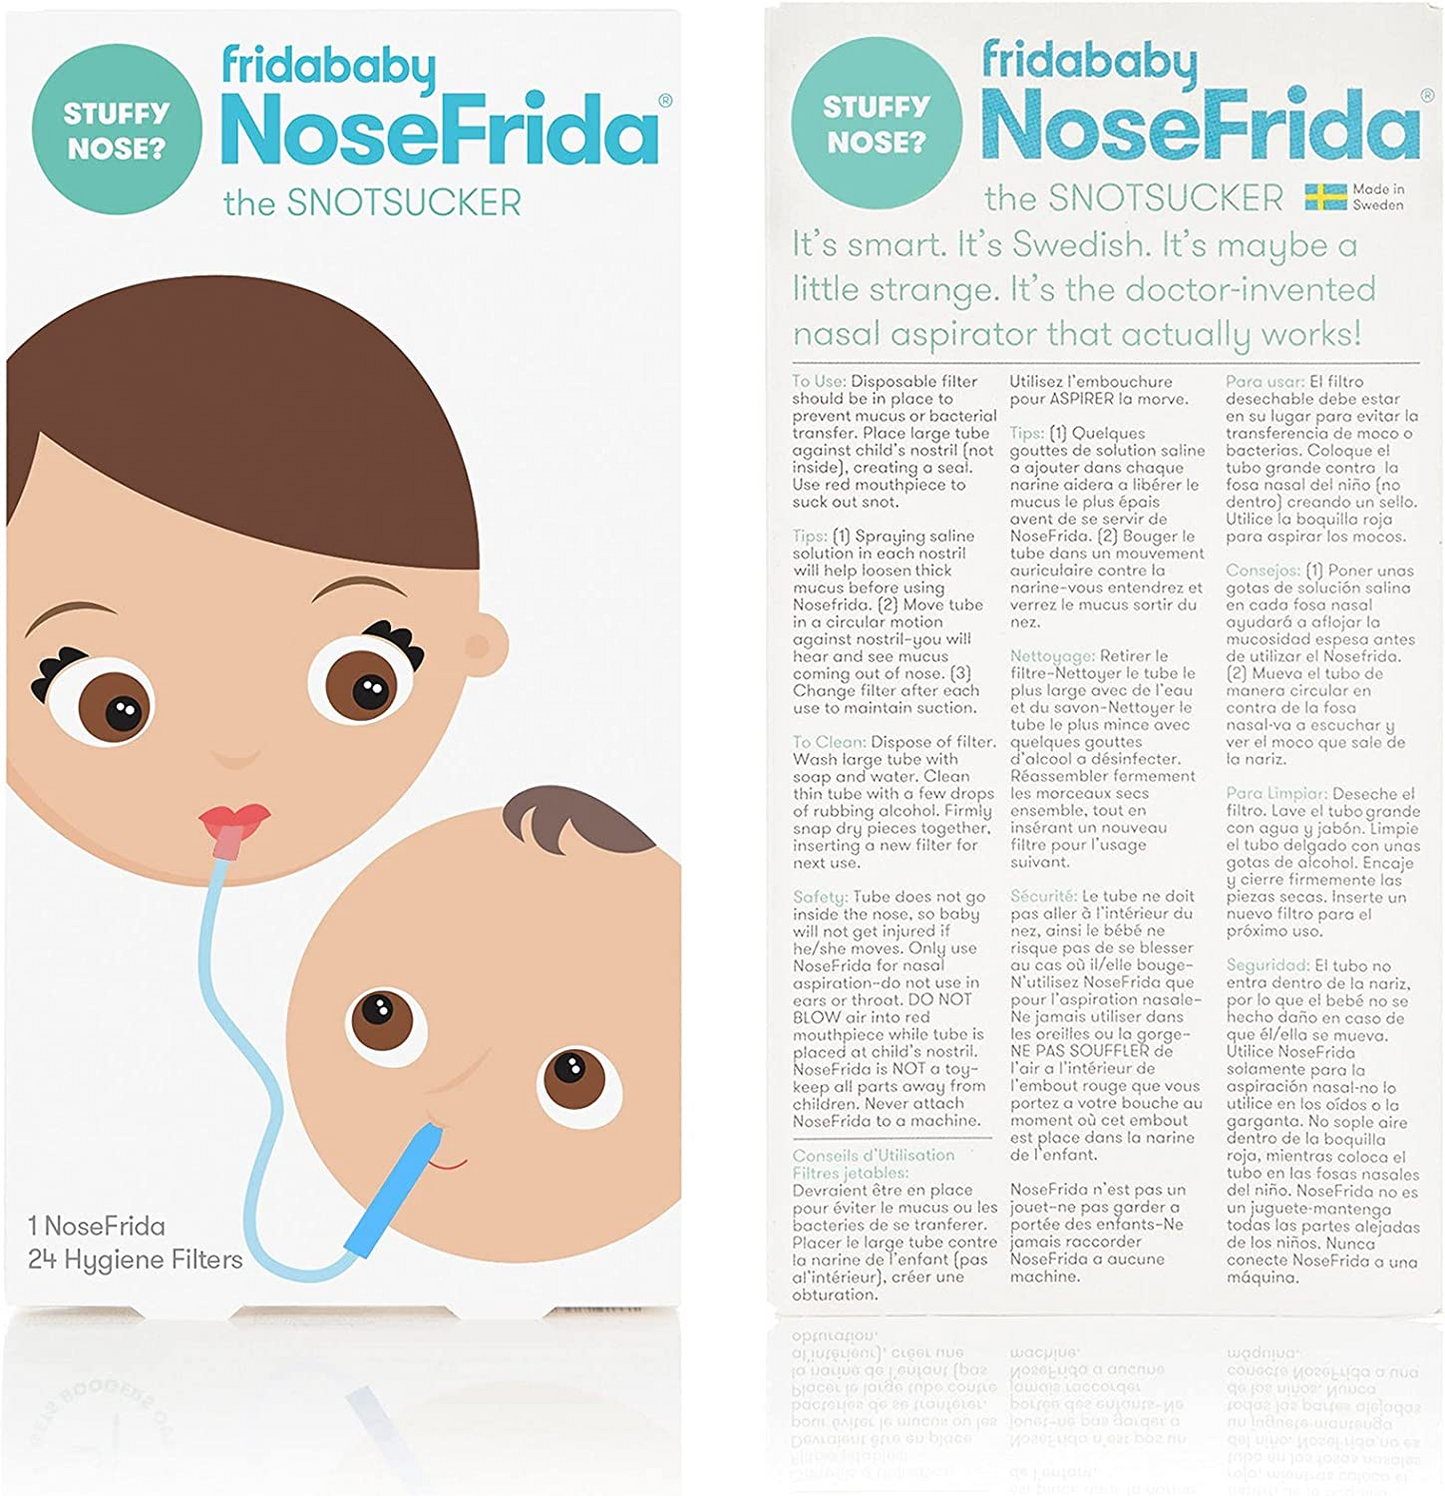 Frida Baby DermaFrida The FlakeFixer The 3-Step Cradle Cap System, White & Baby Nasal Aspirator NoseFrida The SnotSucker with 20 Extra Hygiene Filters by Frida Baby